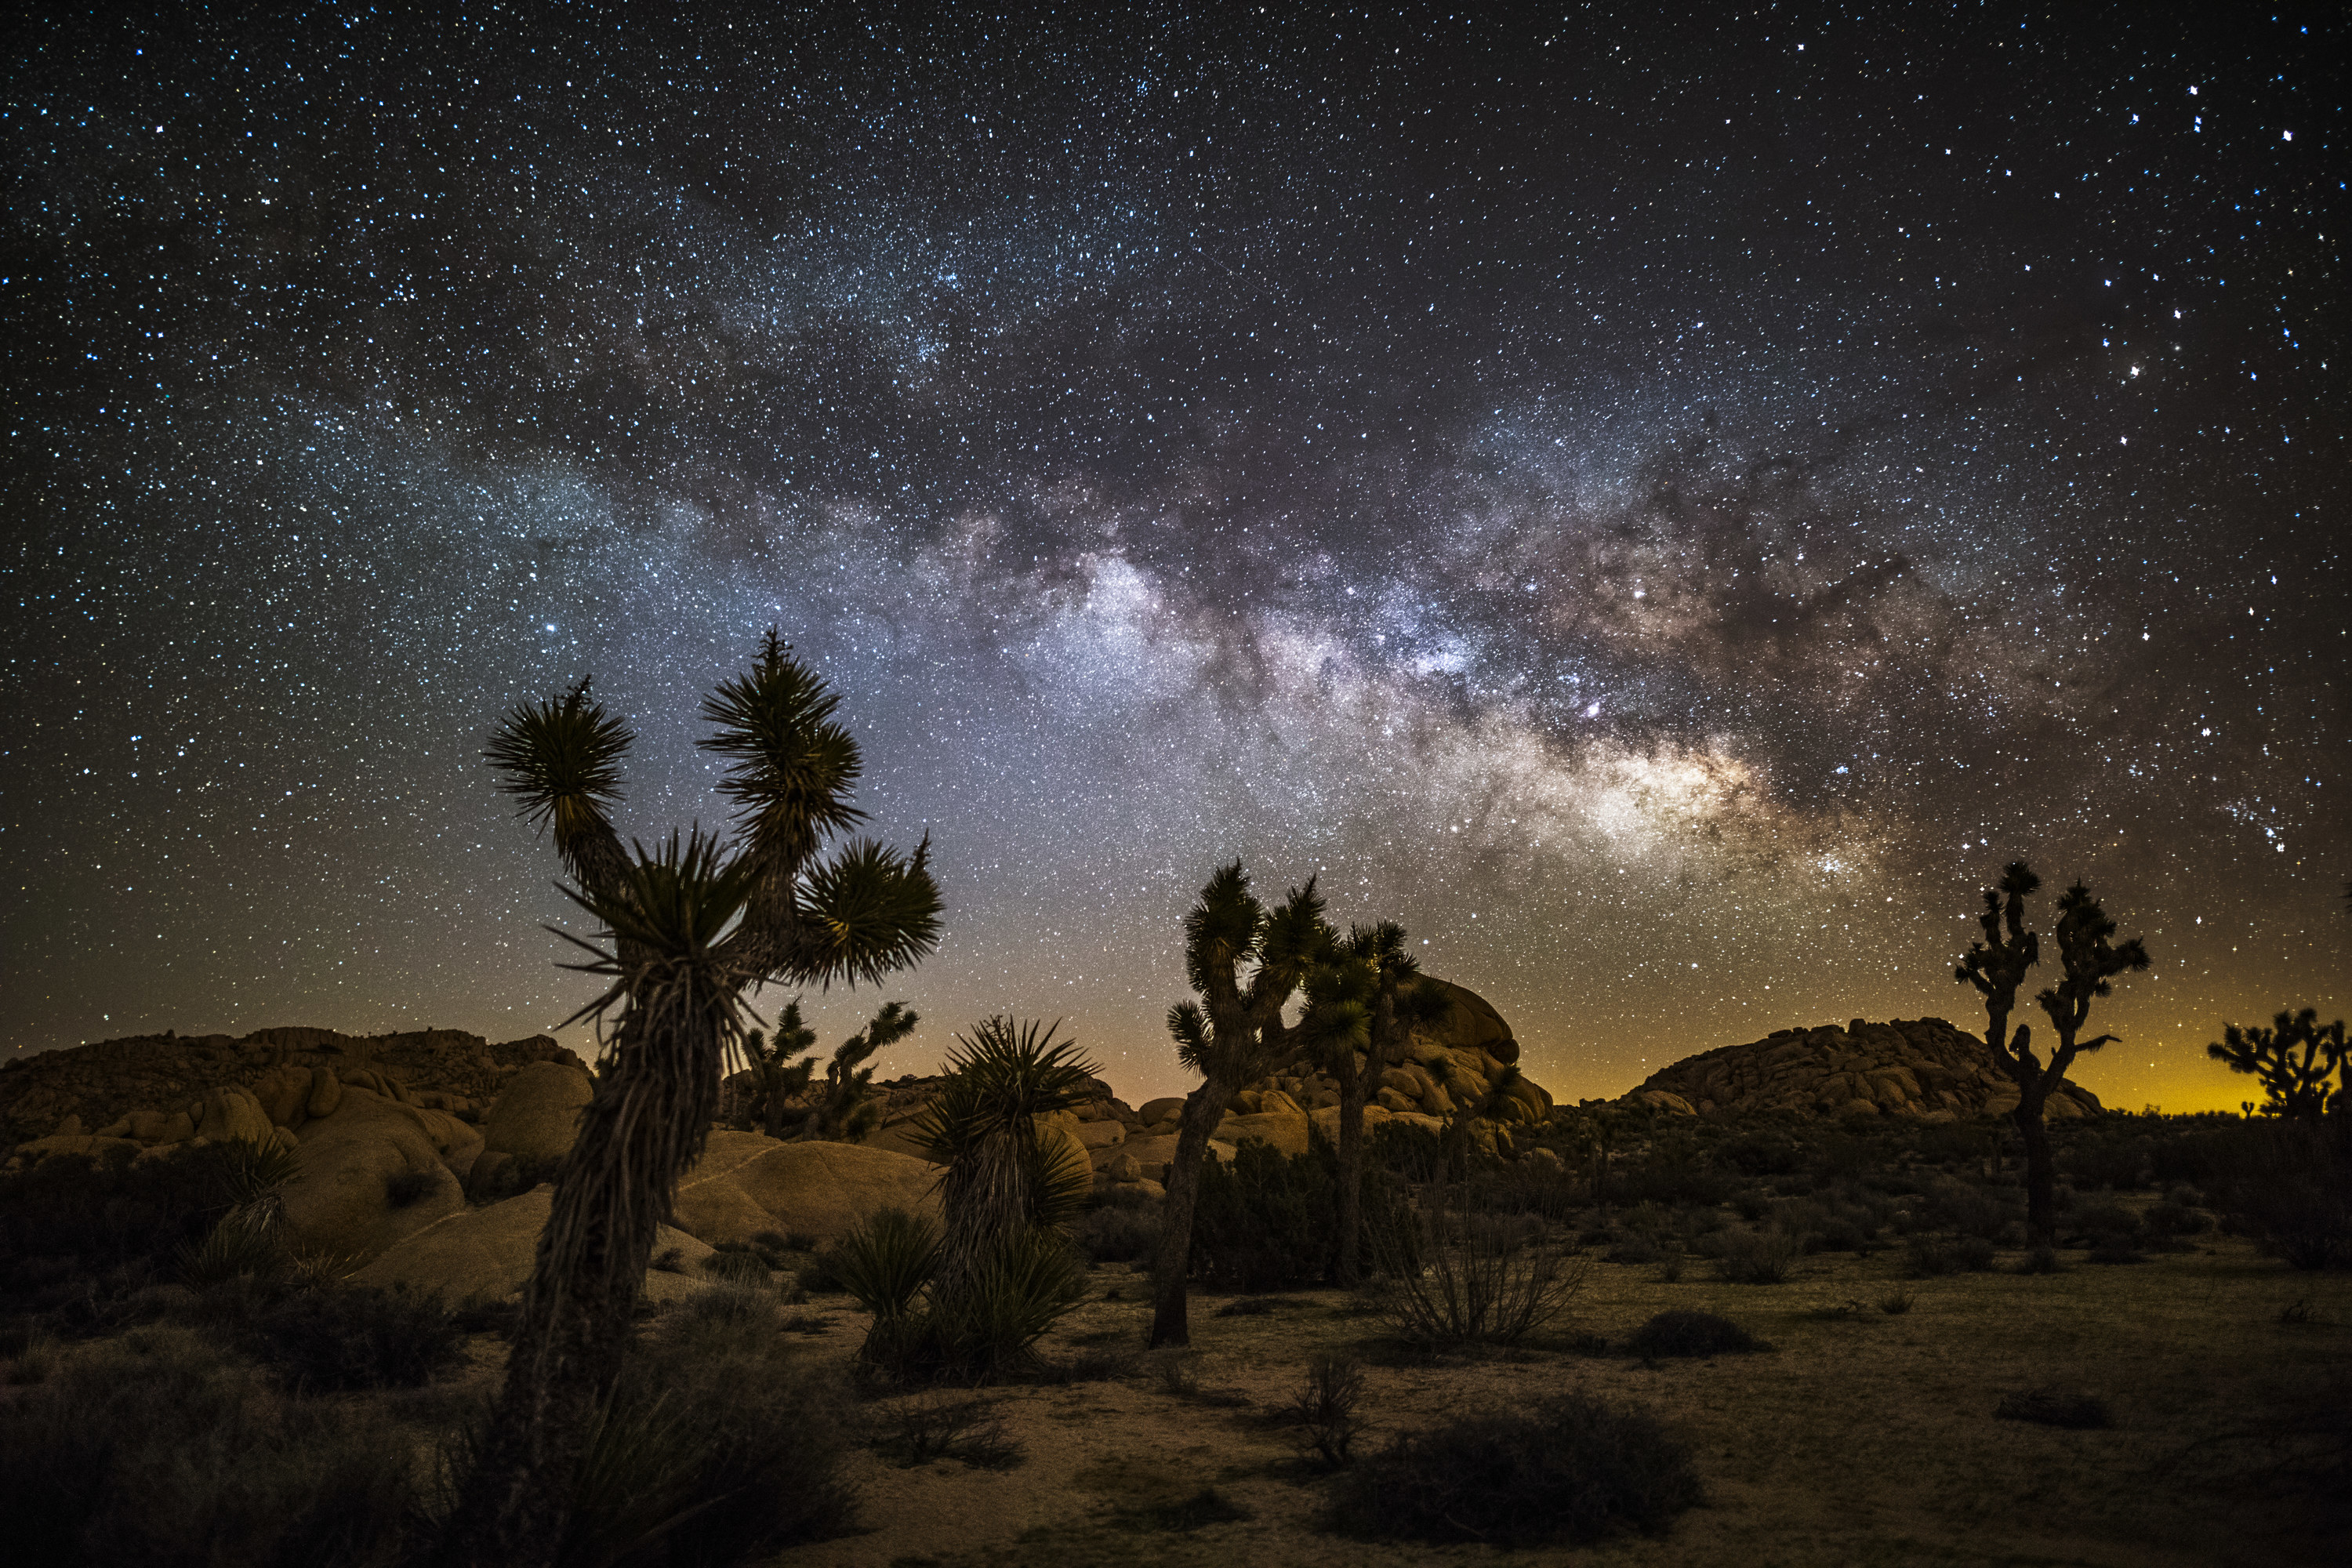 Evening view of the Milky Way in Joshua Tree National Park